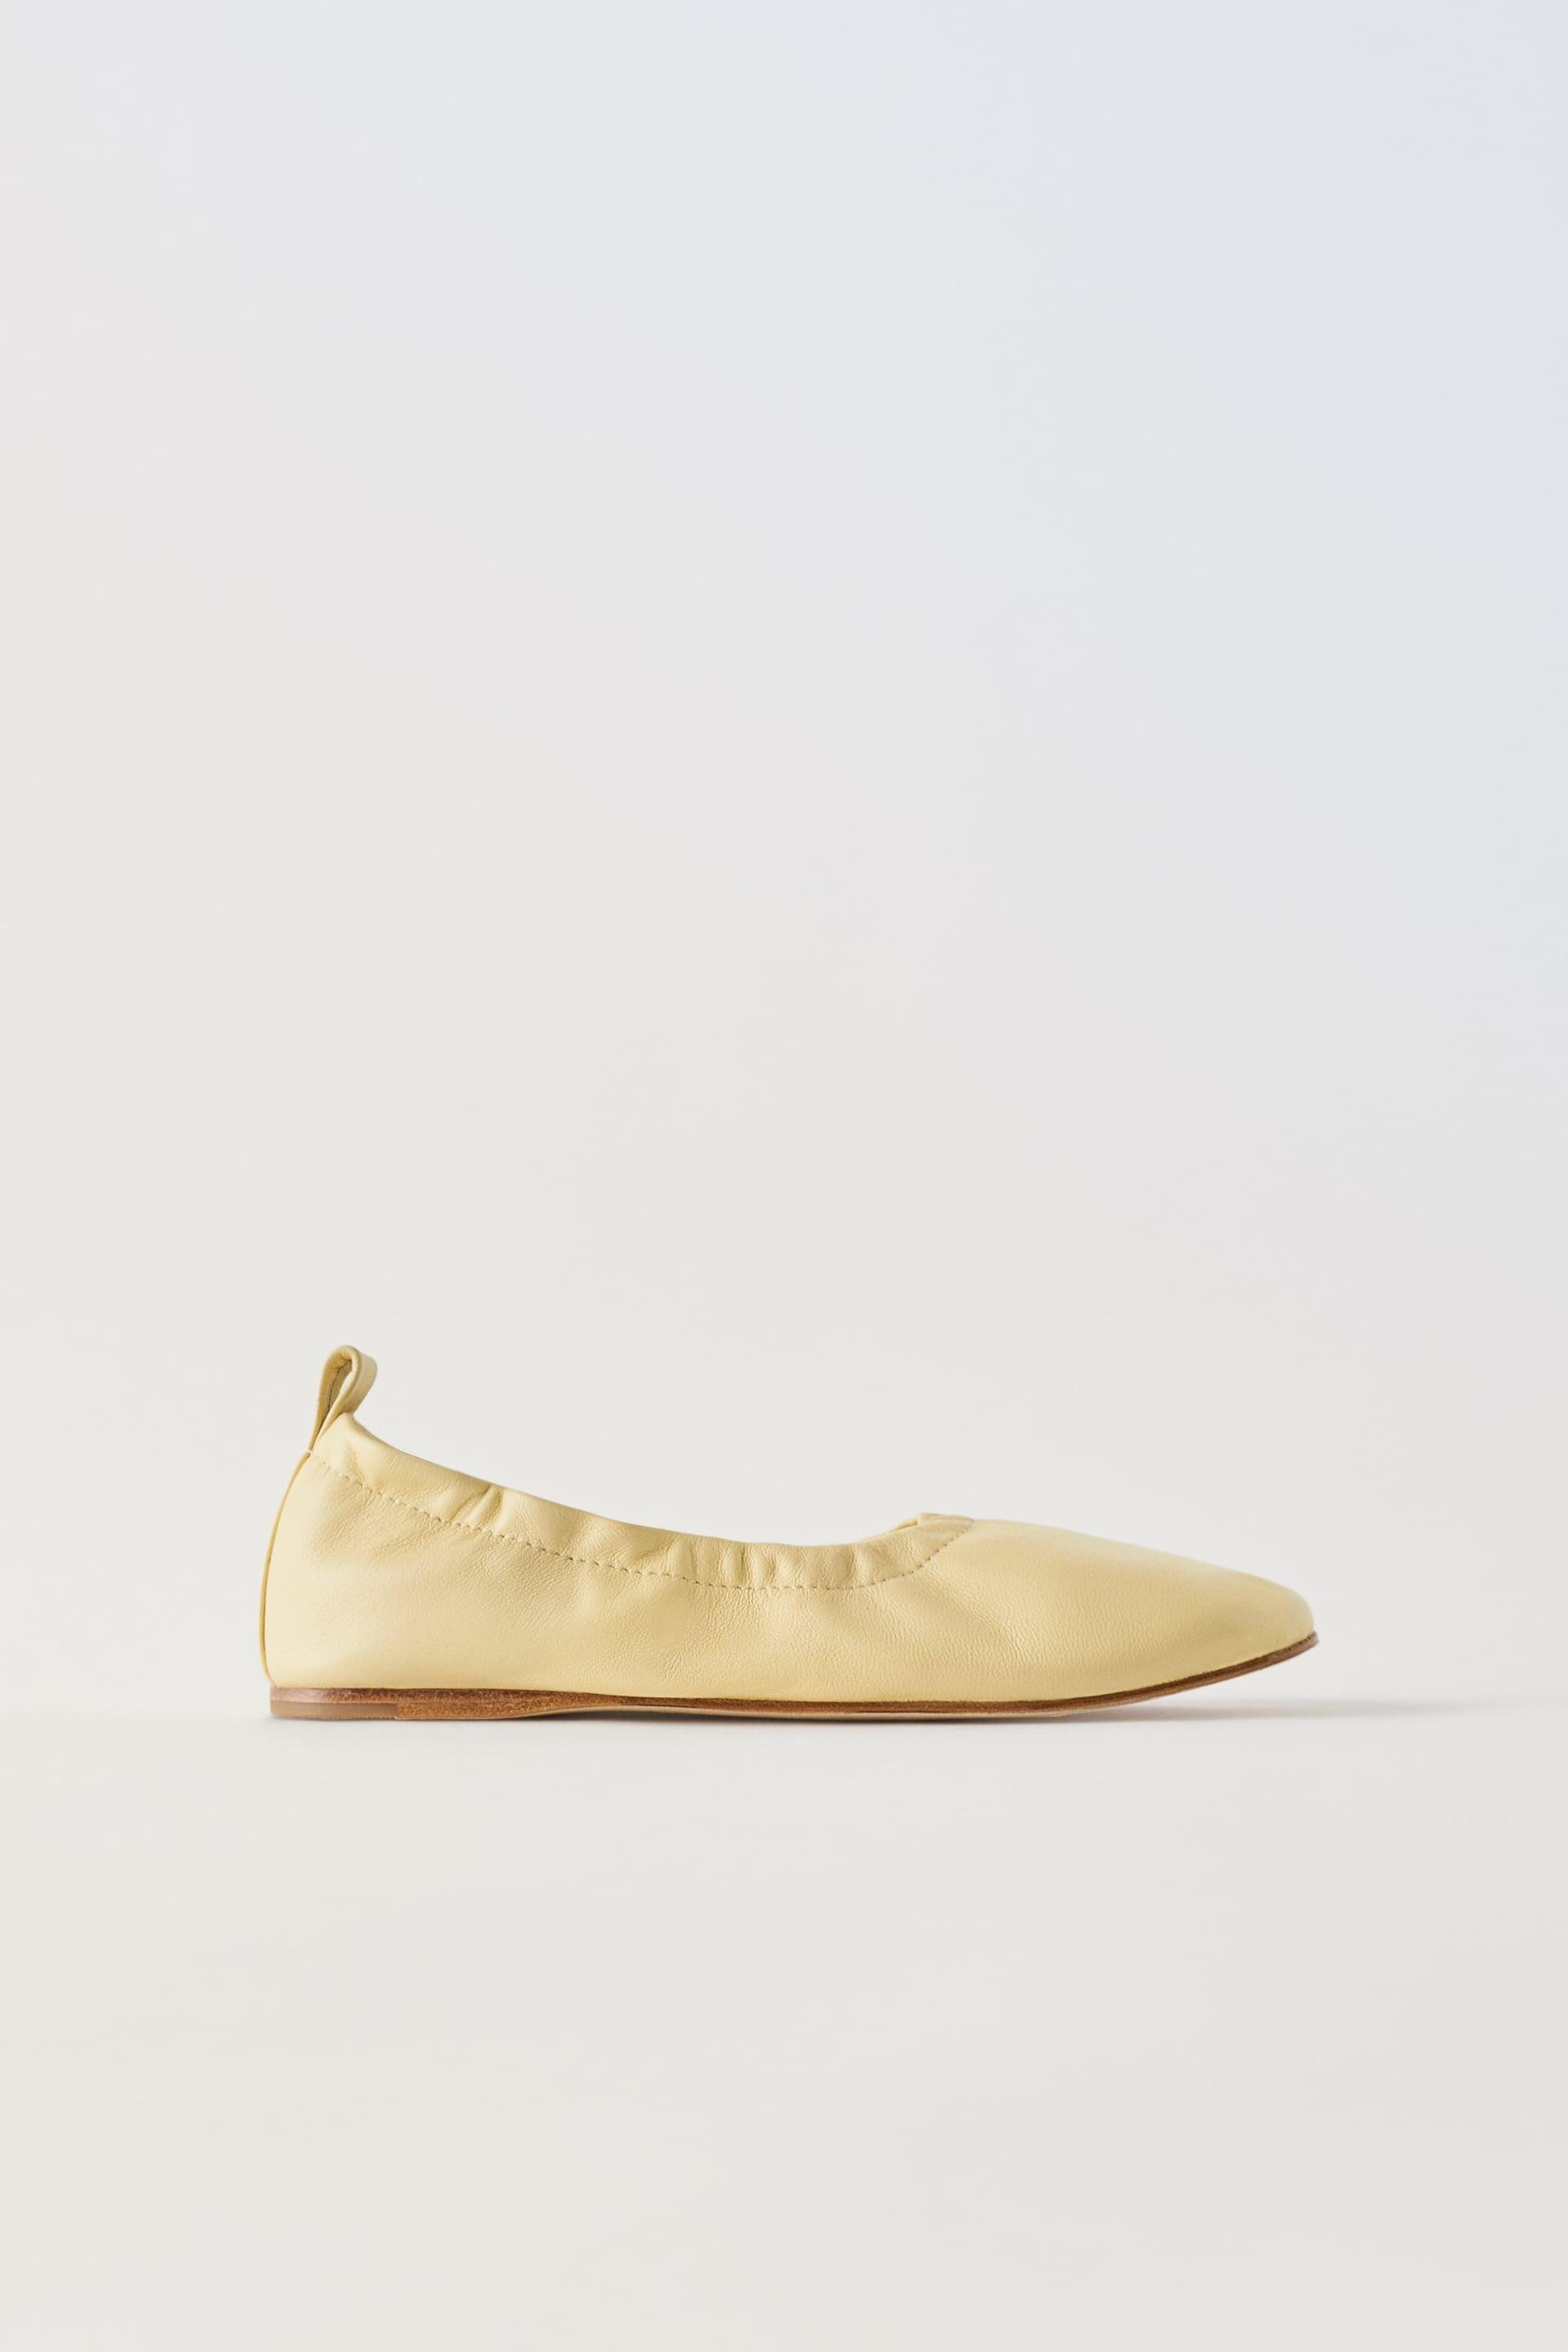 LEATHER BALLET FLATS by ZARA